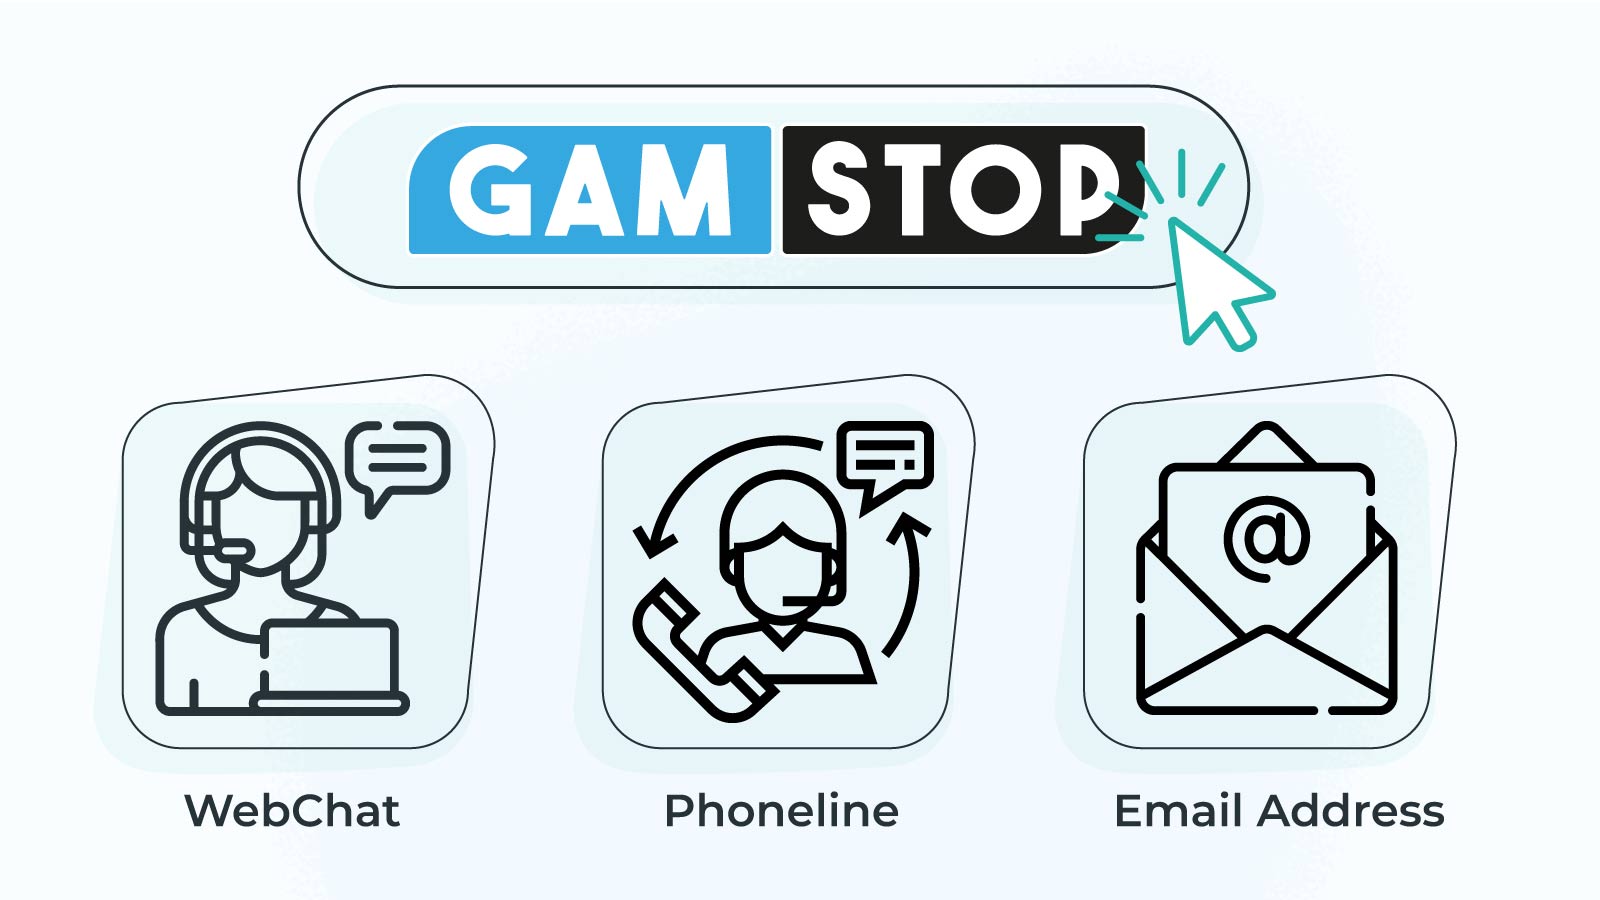 How can you reach GAMSTOP